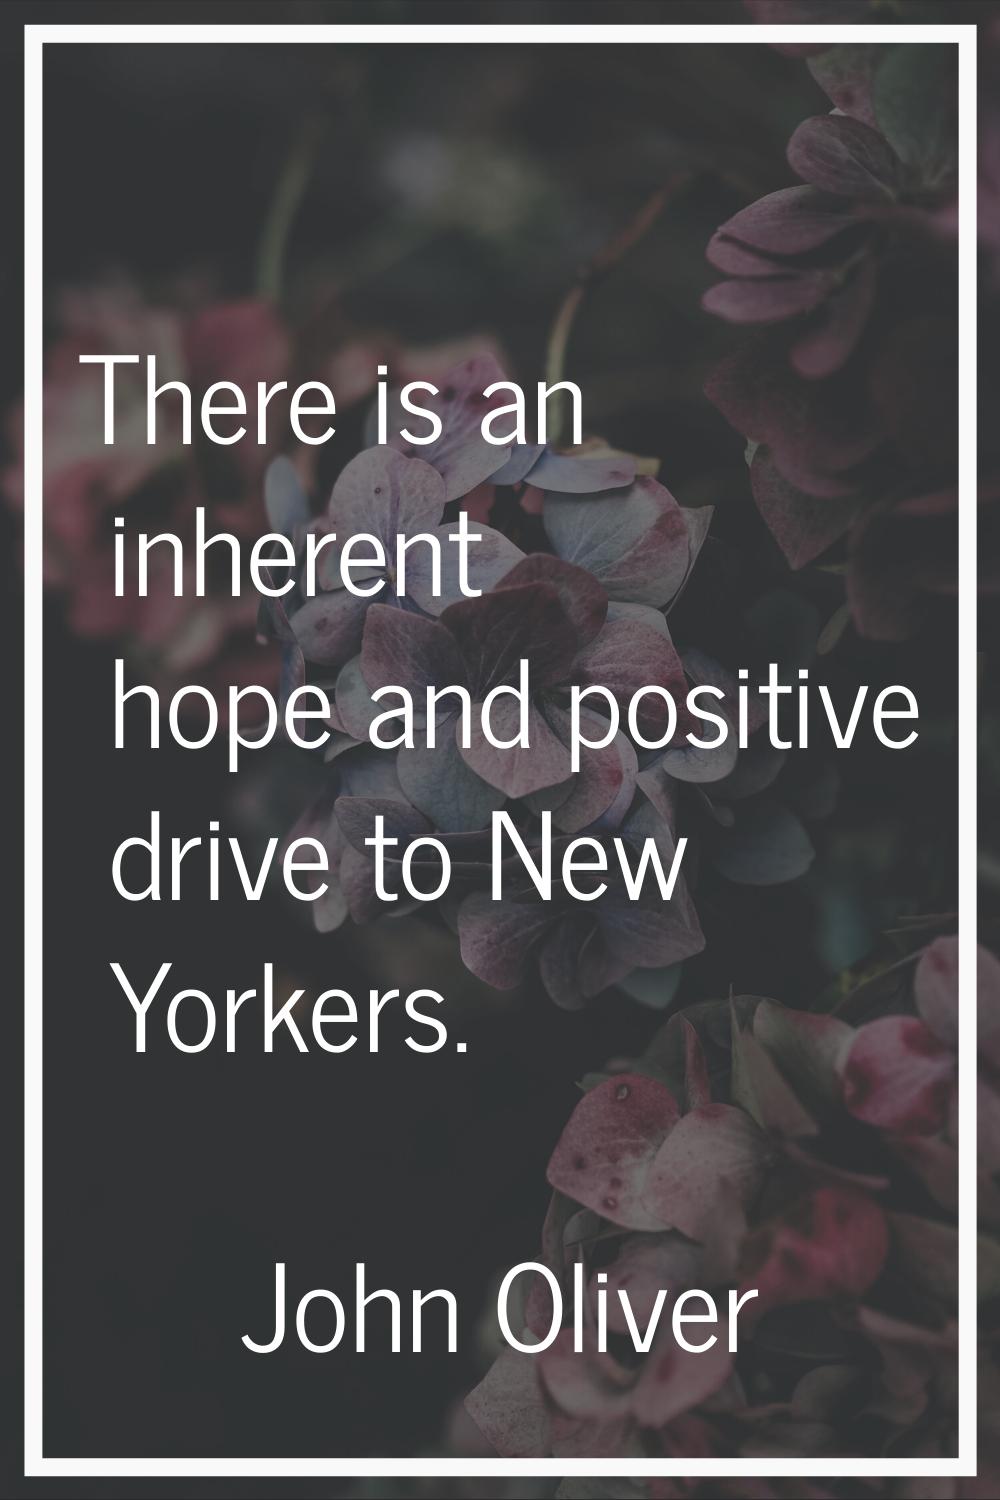 There is an inherent hope and positive drive to New Yorkers.